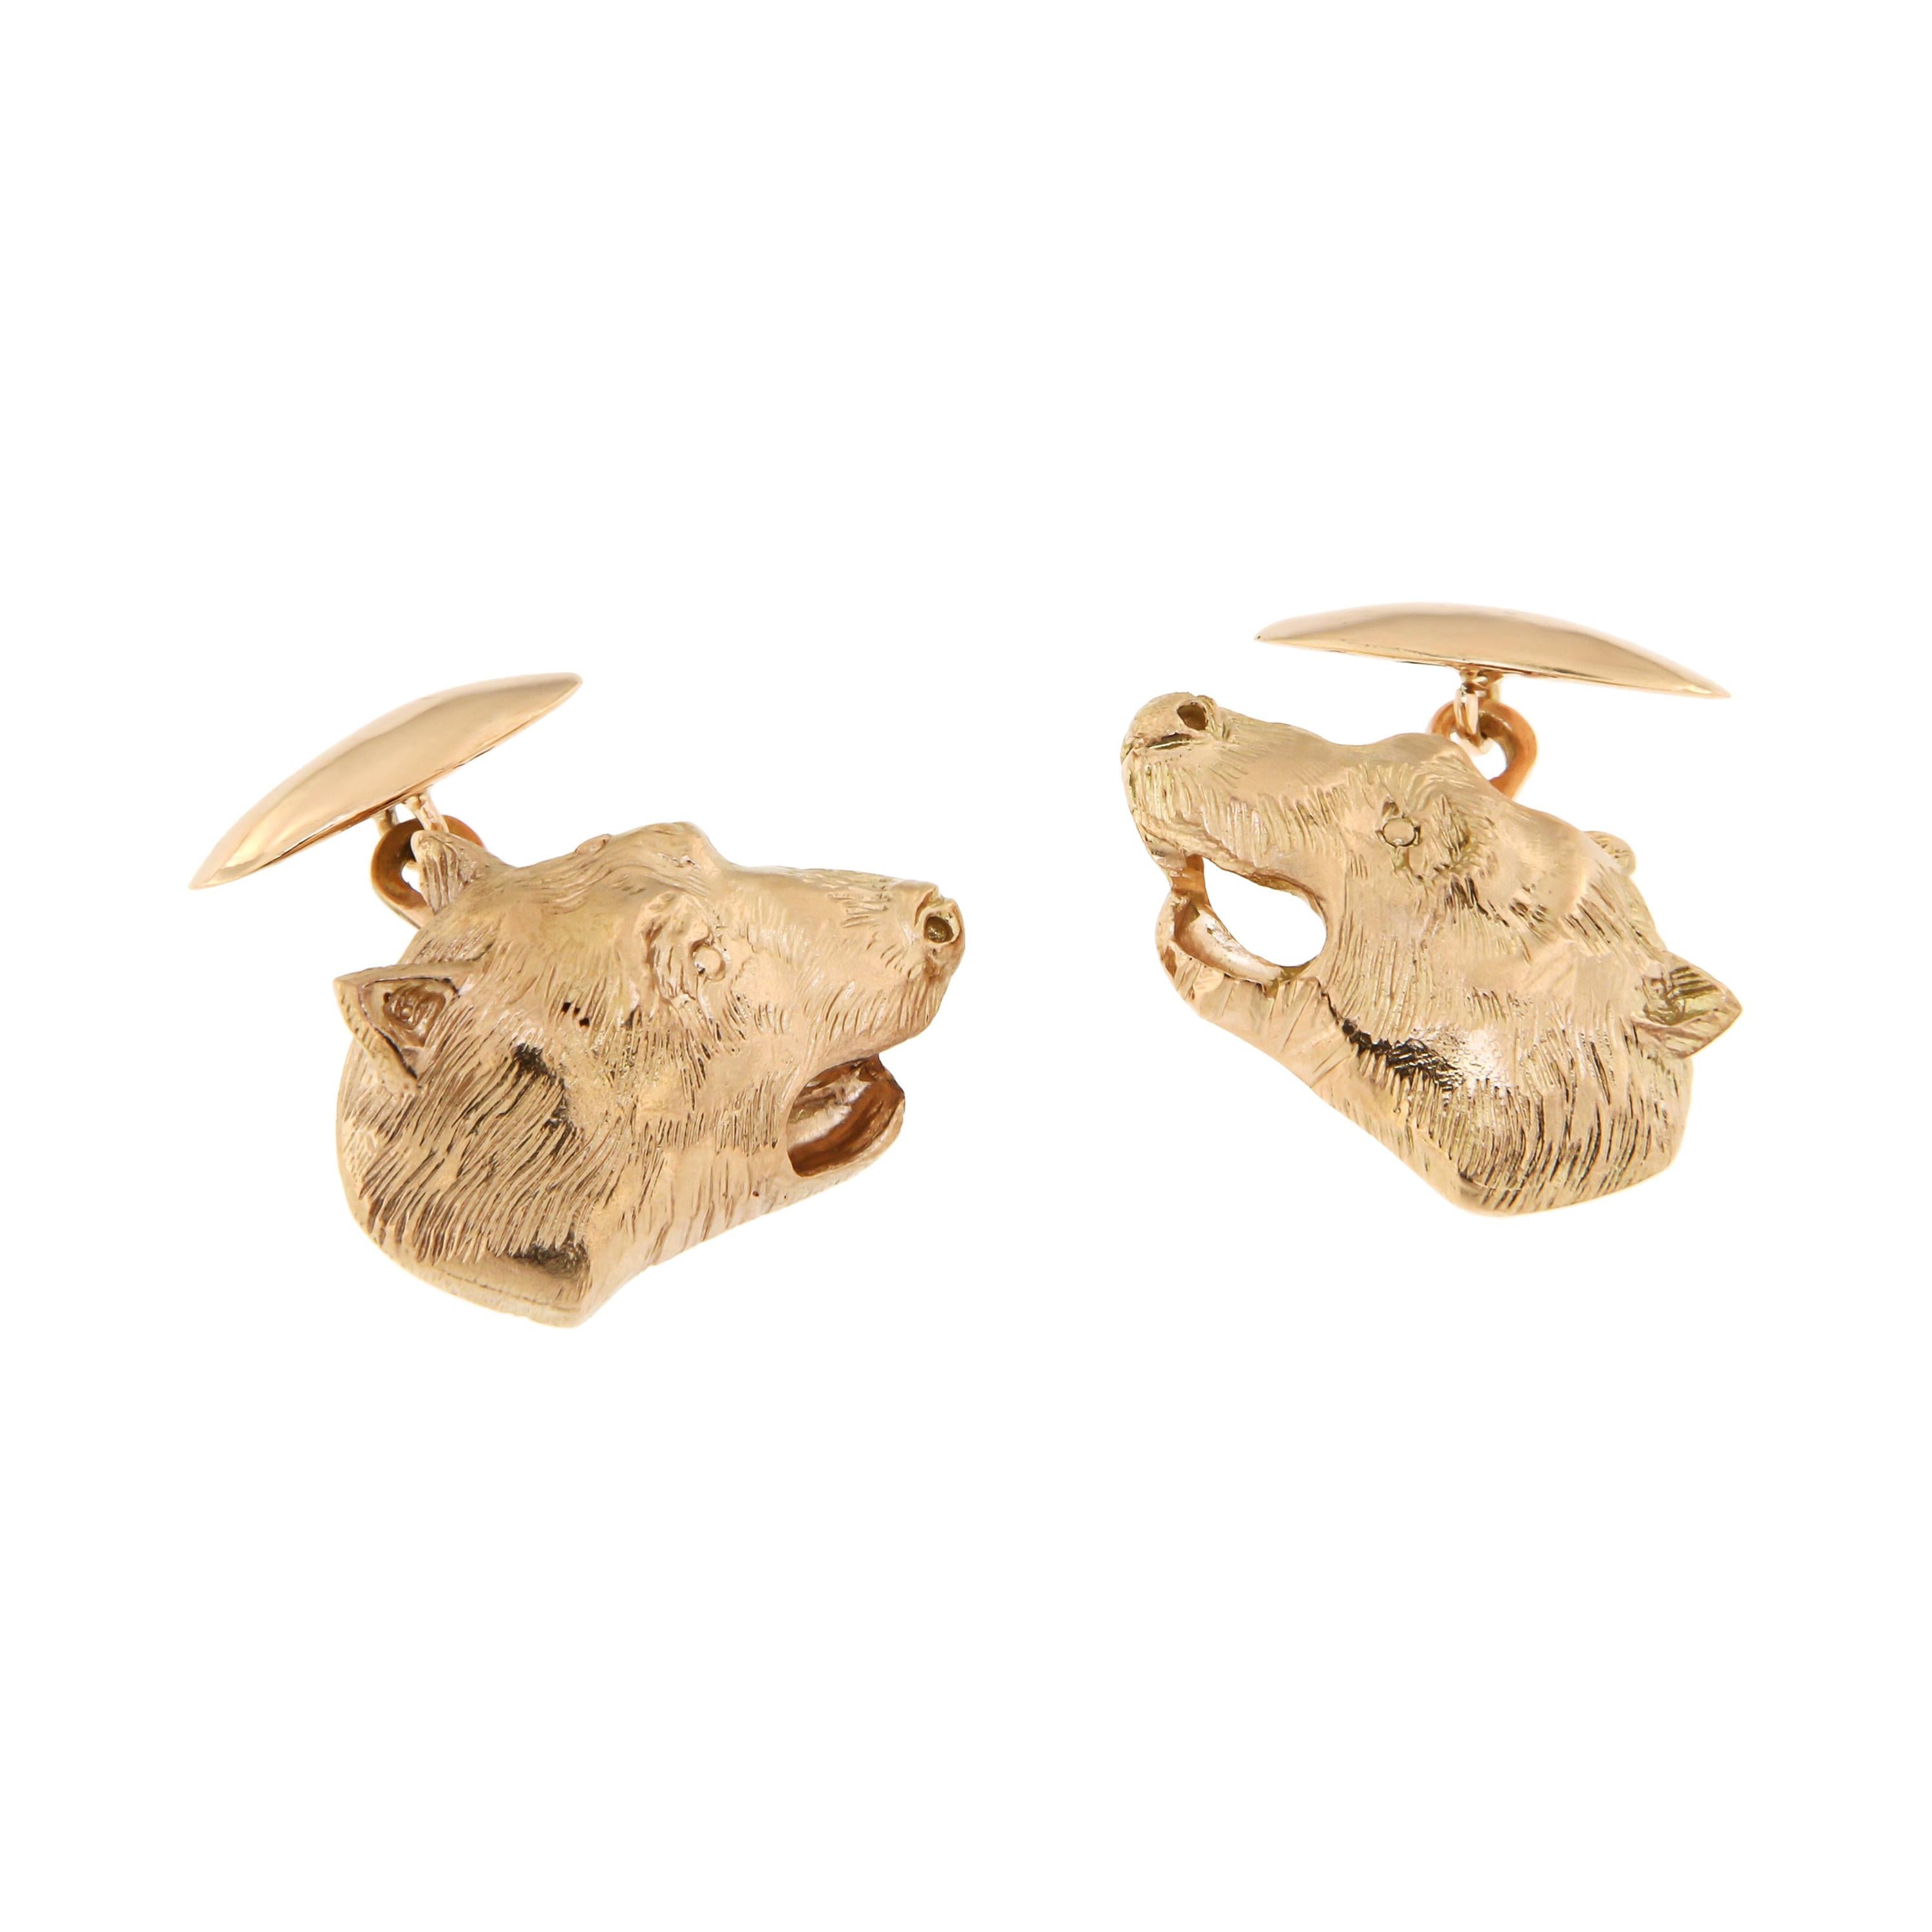 Rose Gold Bear Cufflinks Handcrafted in Italy by Botta Gioielli